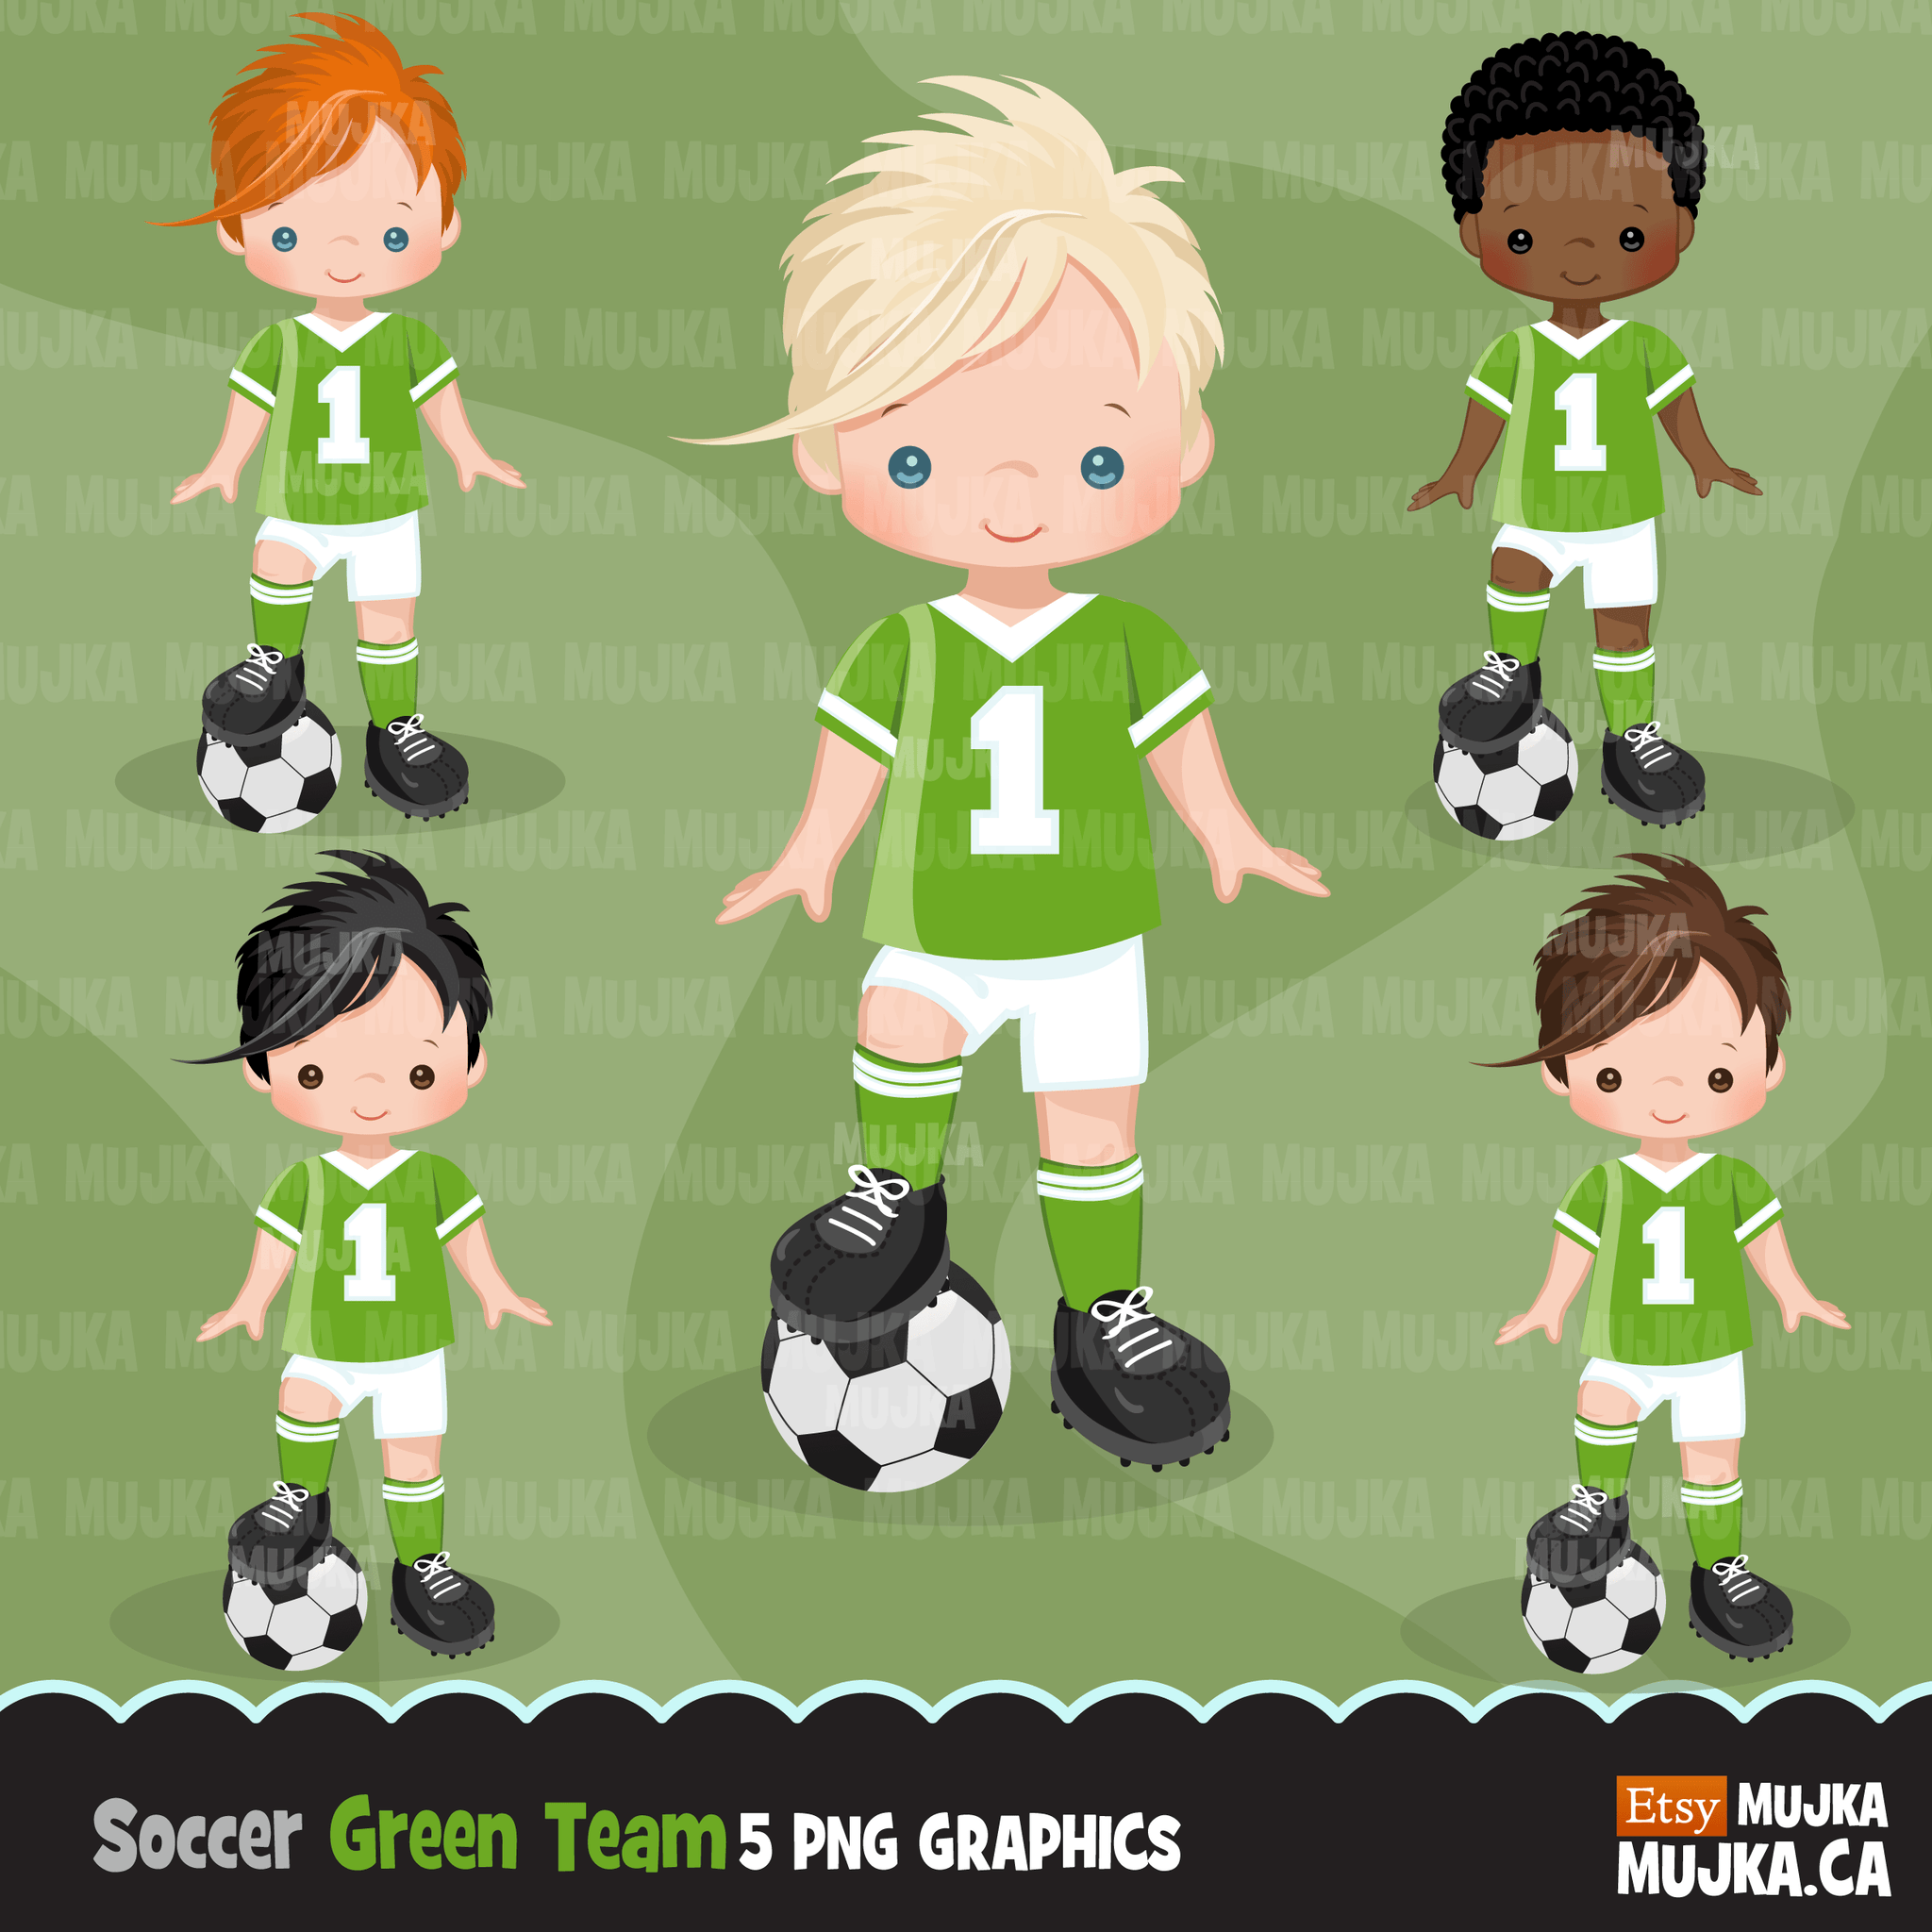 Soccer Clipart Bundle, playing soccer ball, sports, birthday party, boys & girls team jersey, clip art commercial use PNG graphics